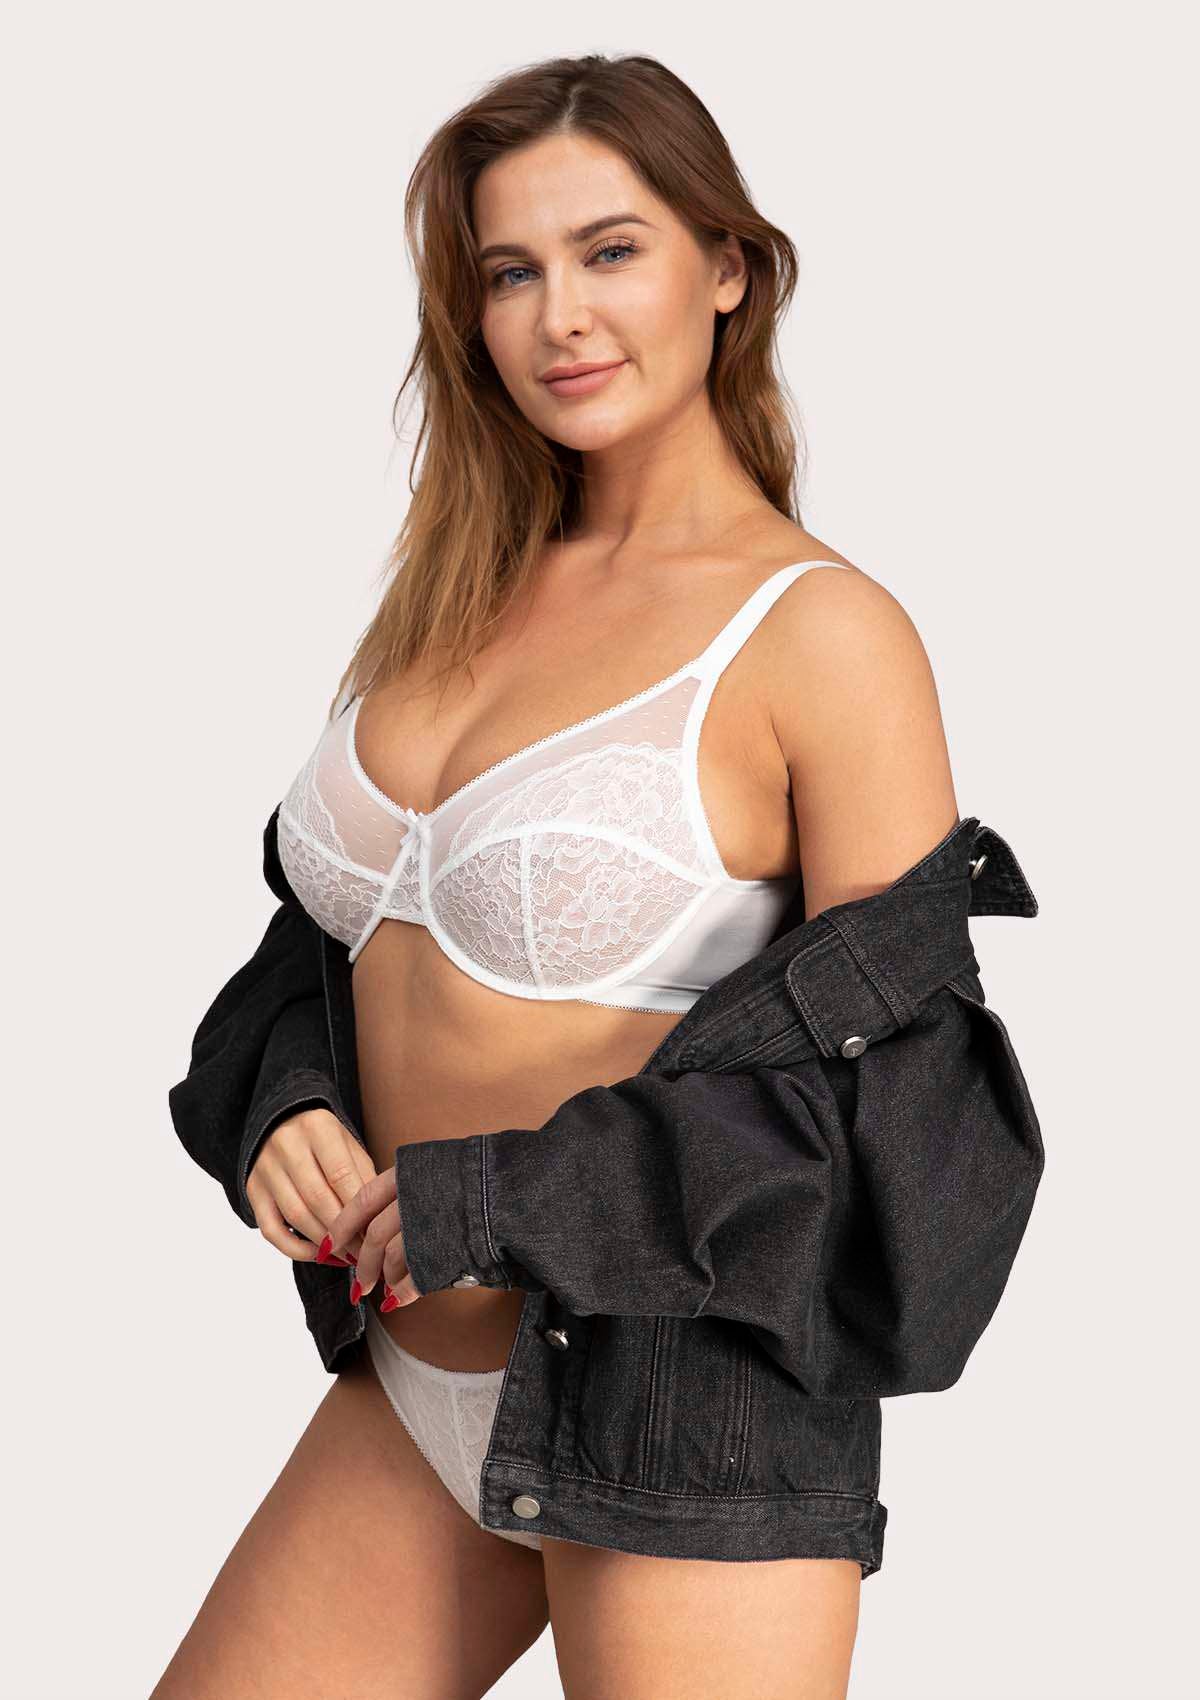 HSIA Enchante Lace Bra And Panties Set: Bra For Side And Back Fat - White / 46 / DD/E